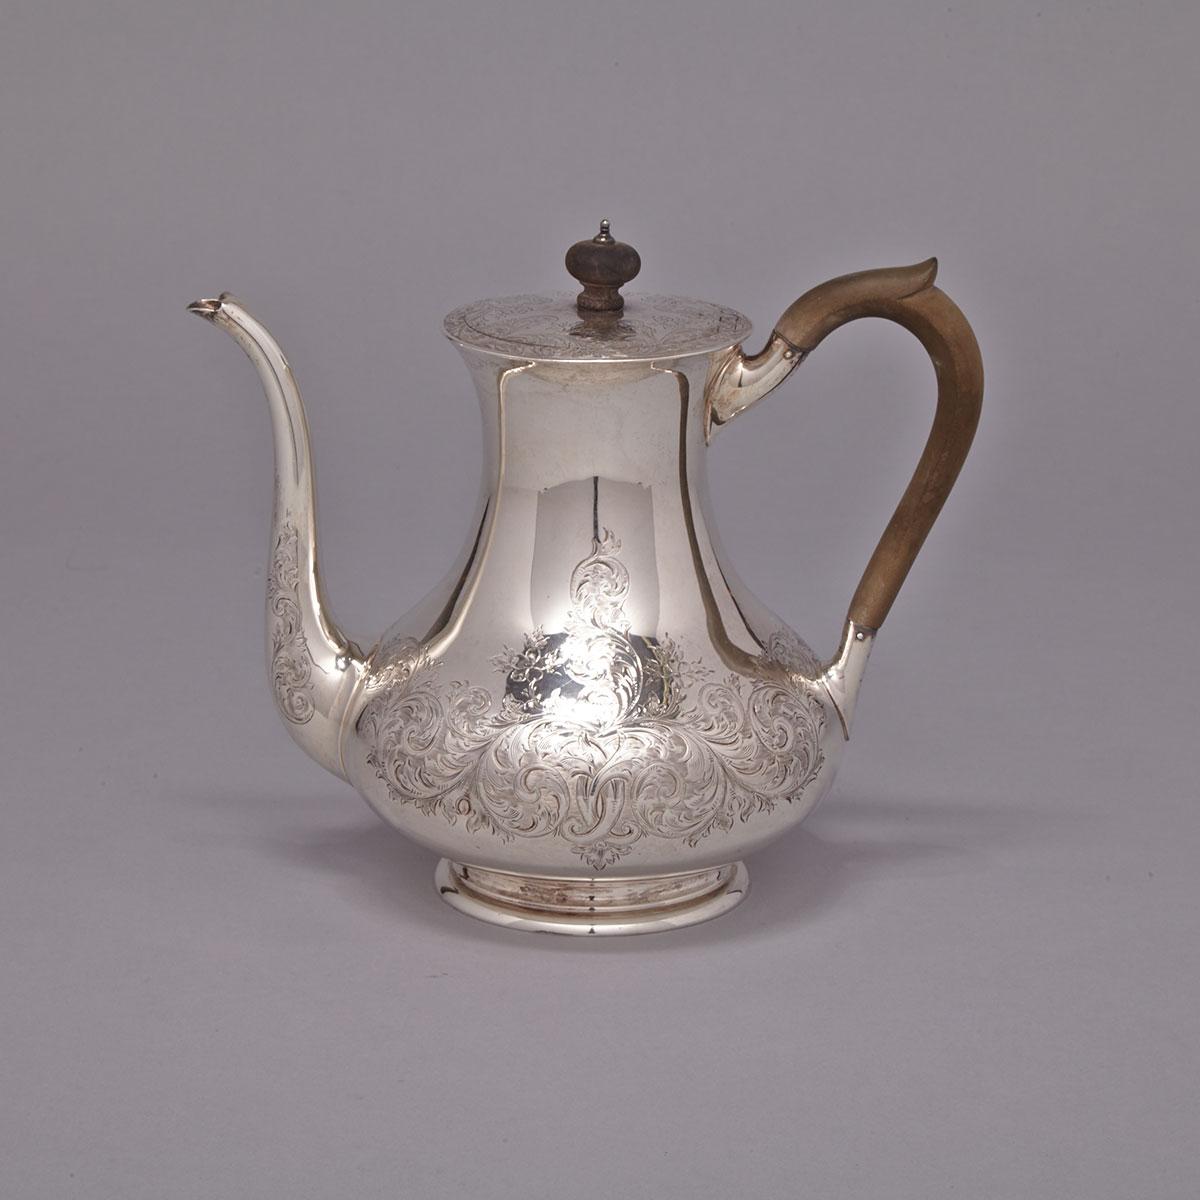 Canadian Silver Coffee Pot, Henry Birks & Sons, Montreal, Que., c.1920